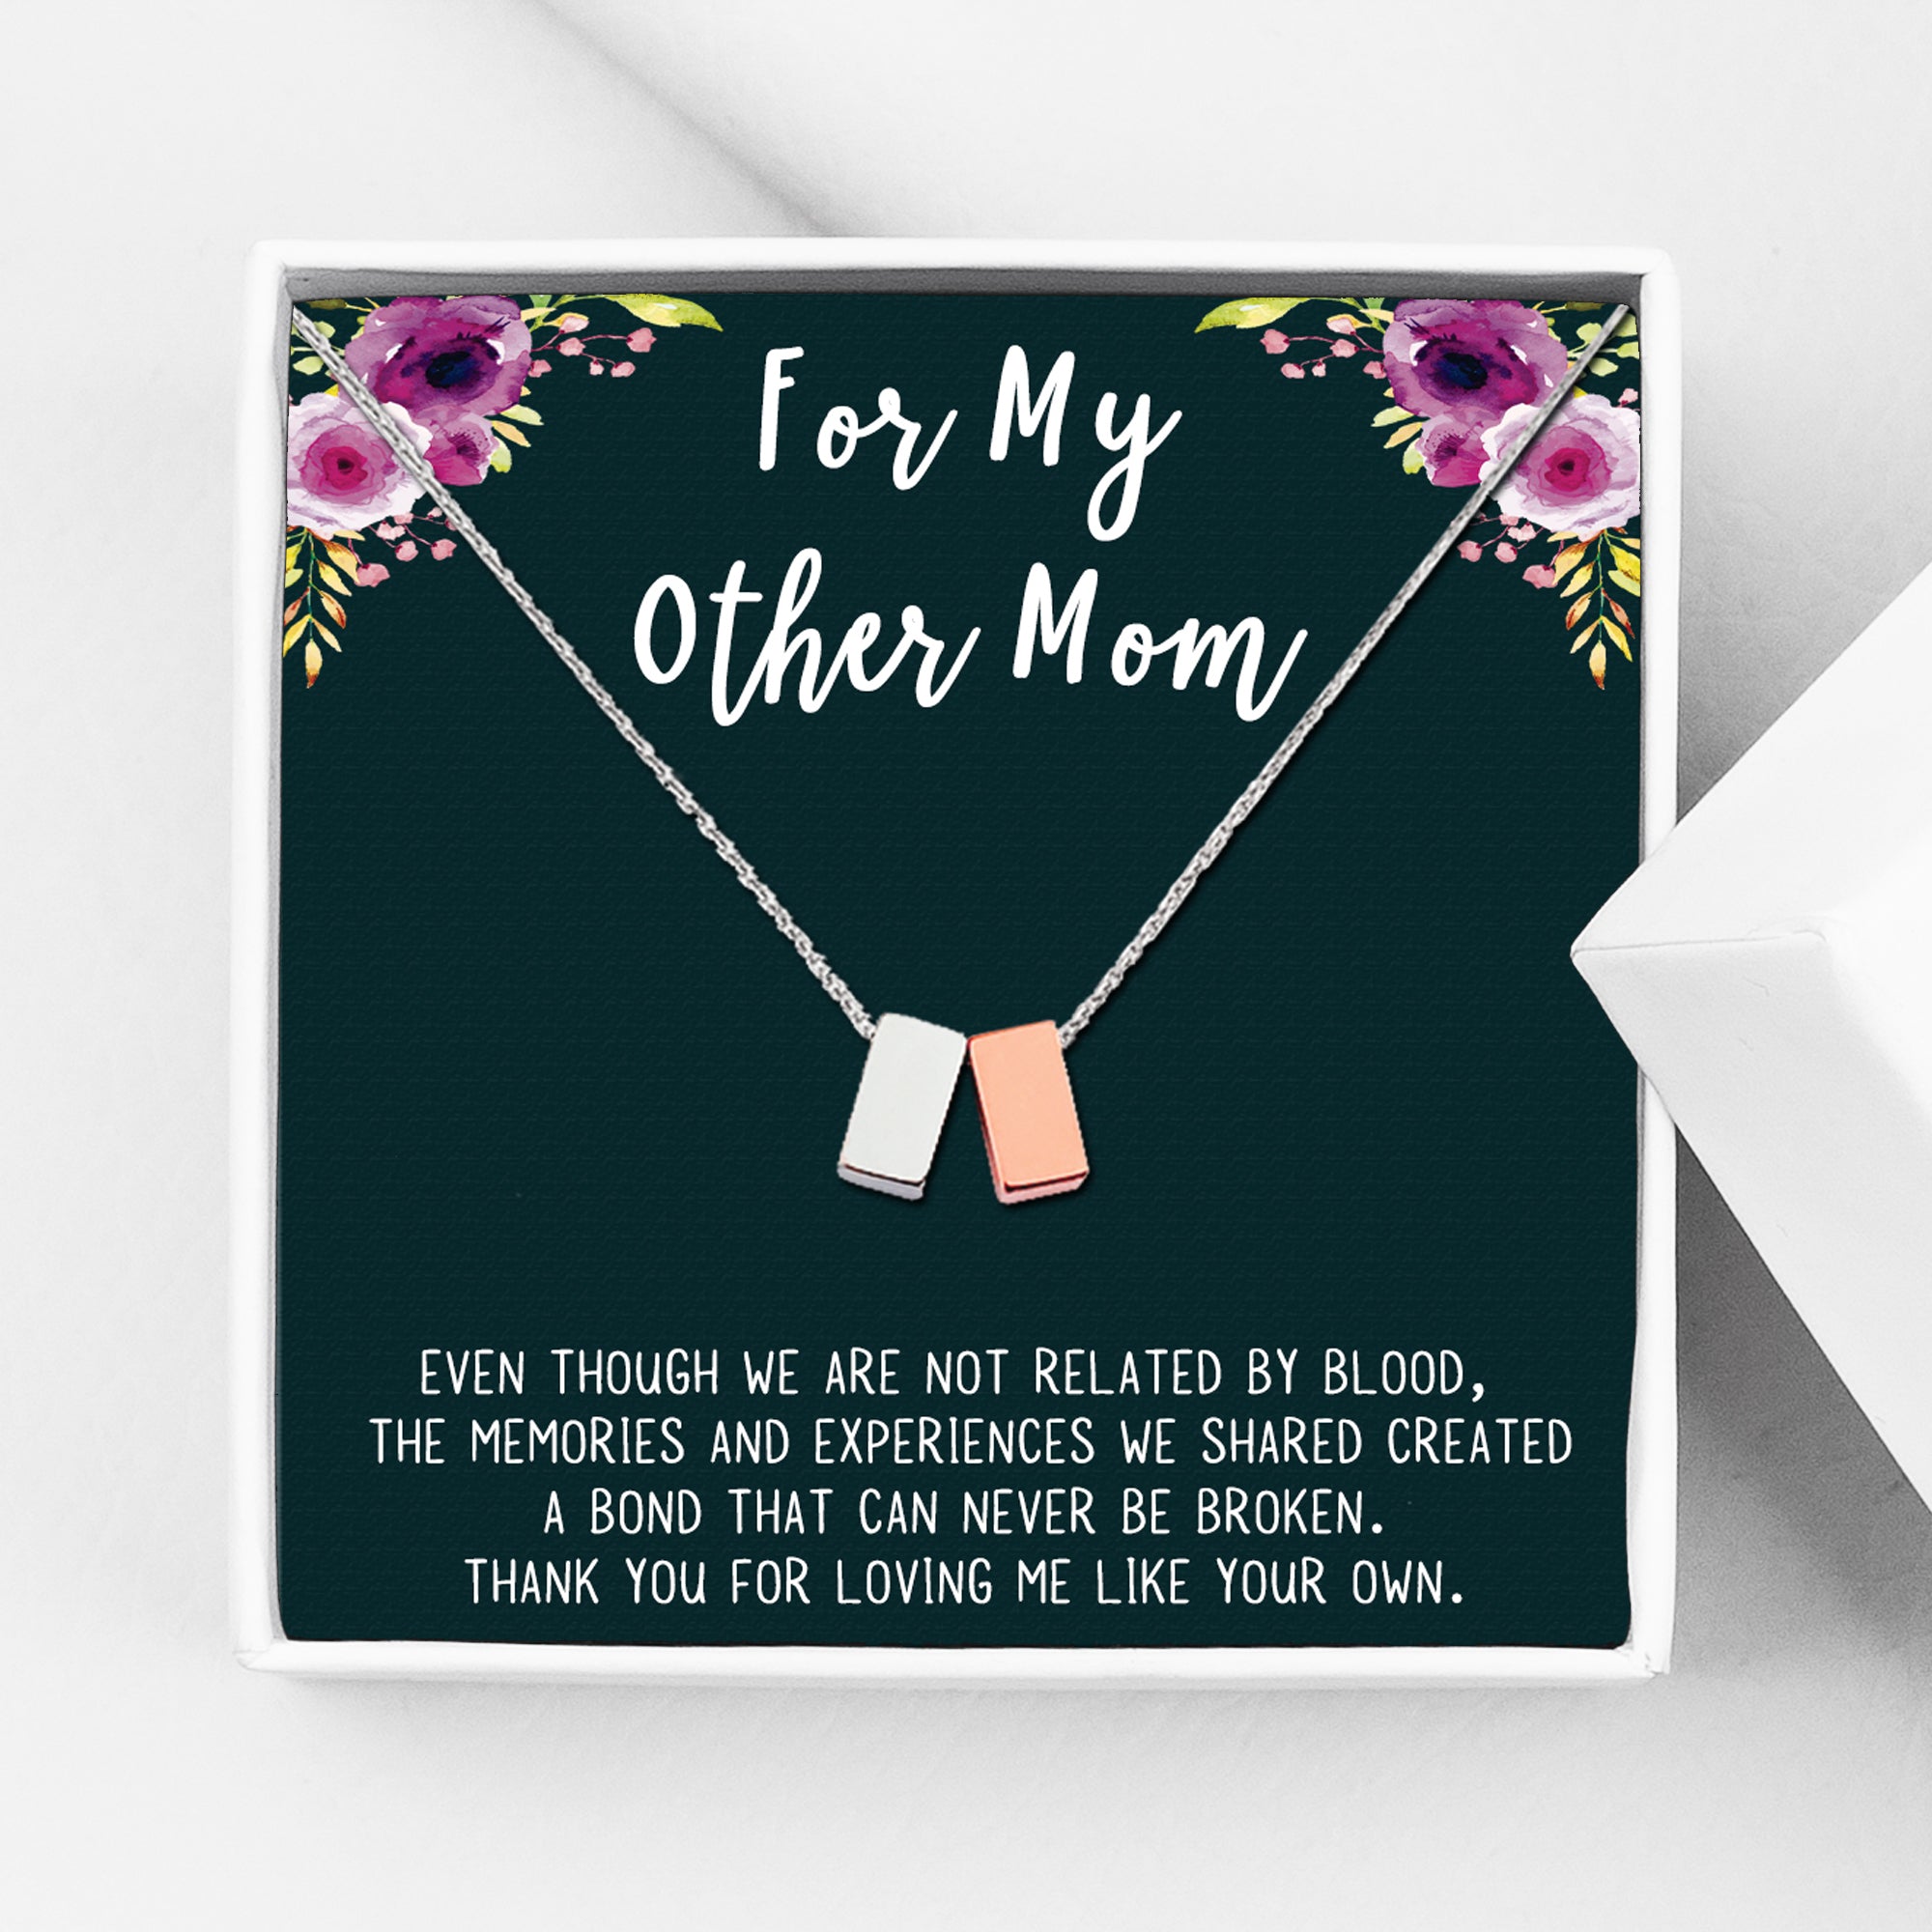 Anavia Mom and Daughter Gift Set, Mother Daughter Necklace, Jewelry Gift,  Gift for Daughter, Birthday Gift, Christmas Gift for Her, Two Cube  Necklaces with Wish Card-[Rose Gold Charms] 